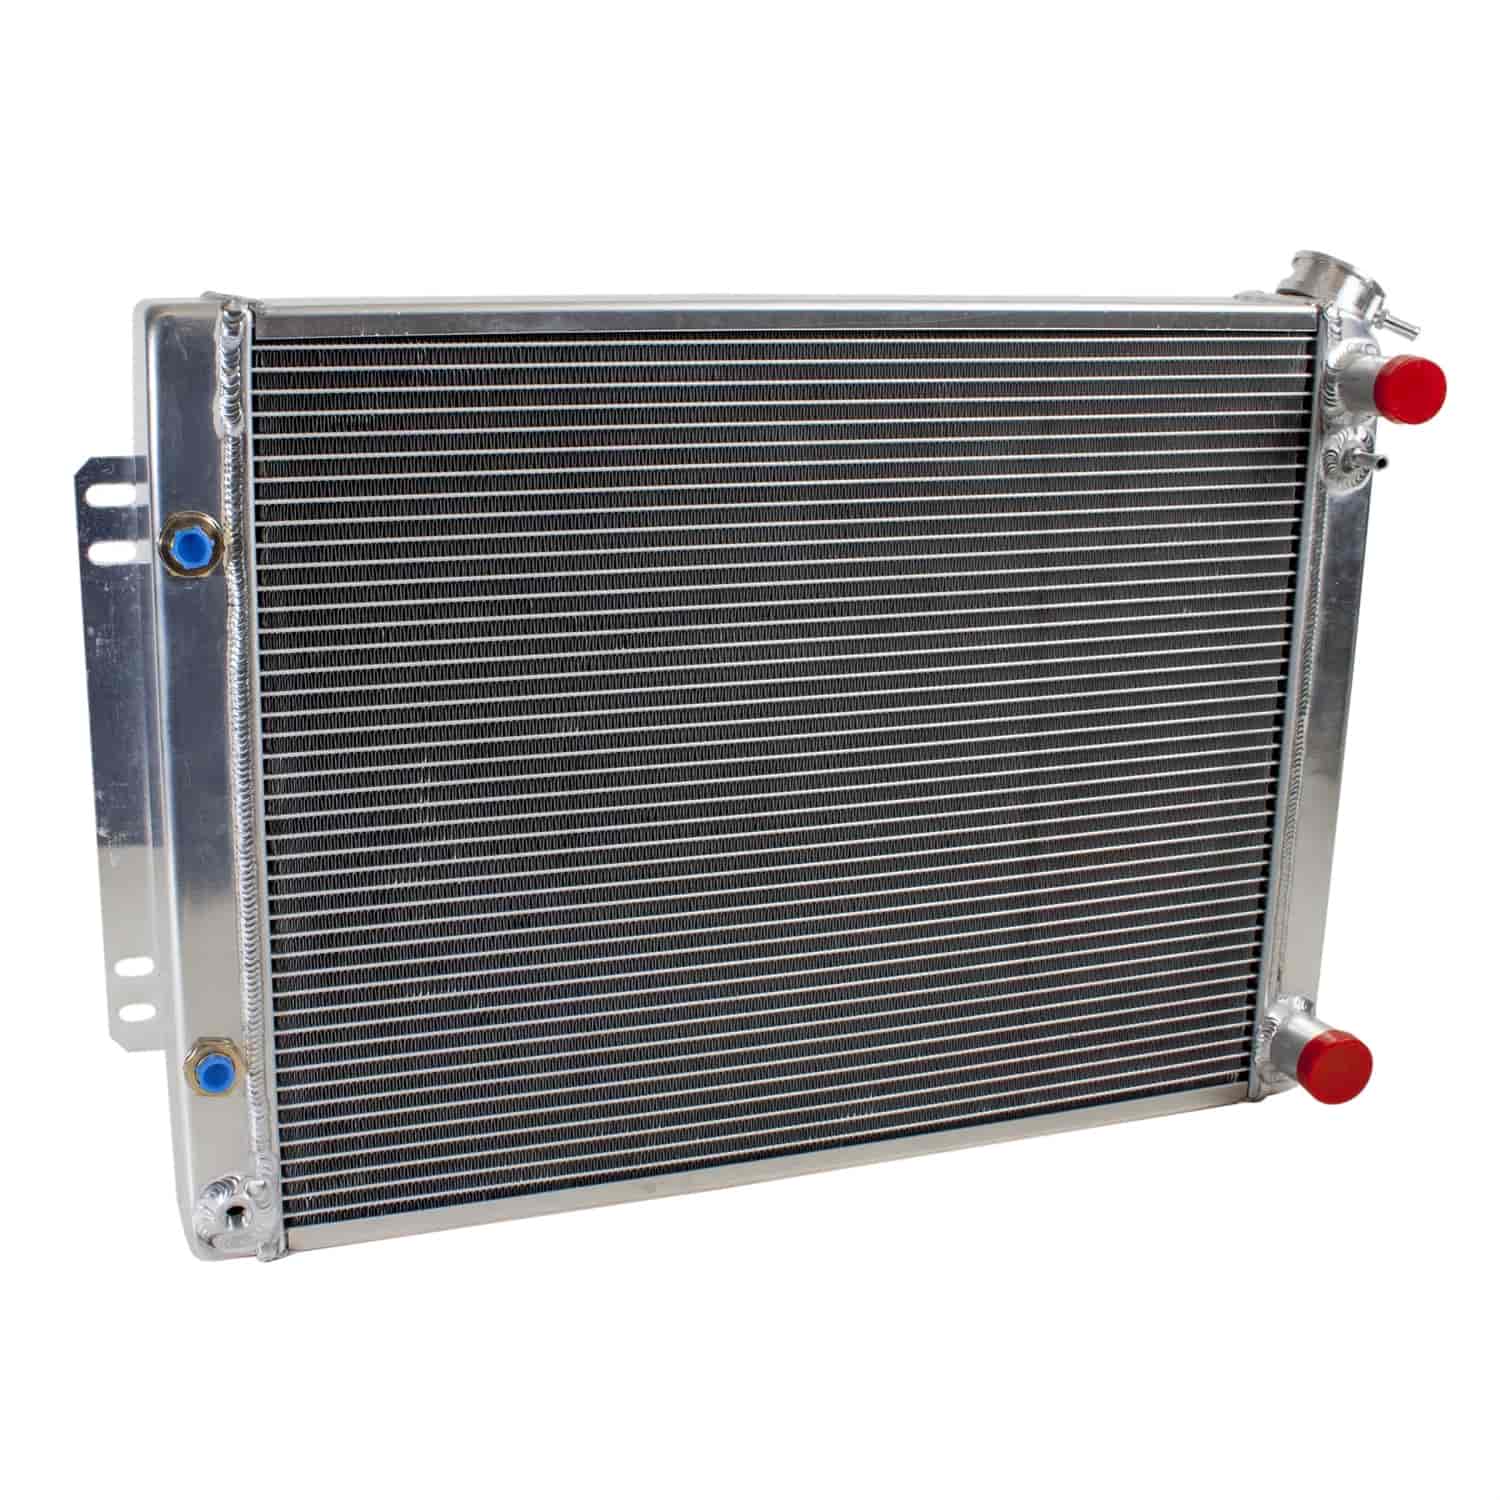 PerformanceFit Radiator for GM 1964-1967 A Body & 1967-1969 F Body with Transmission Cooler